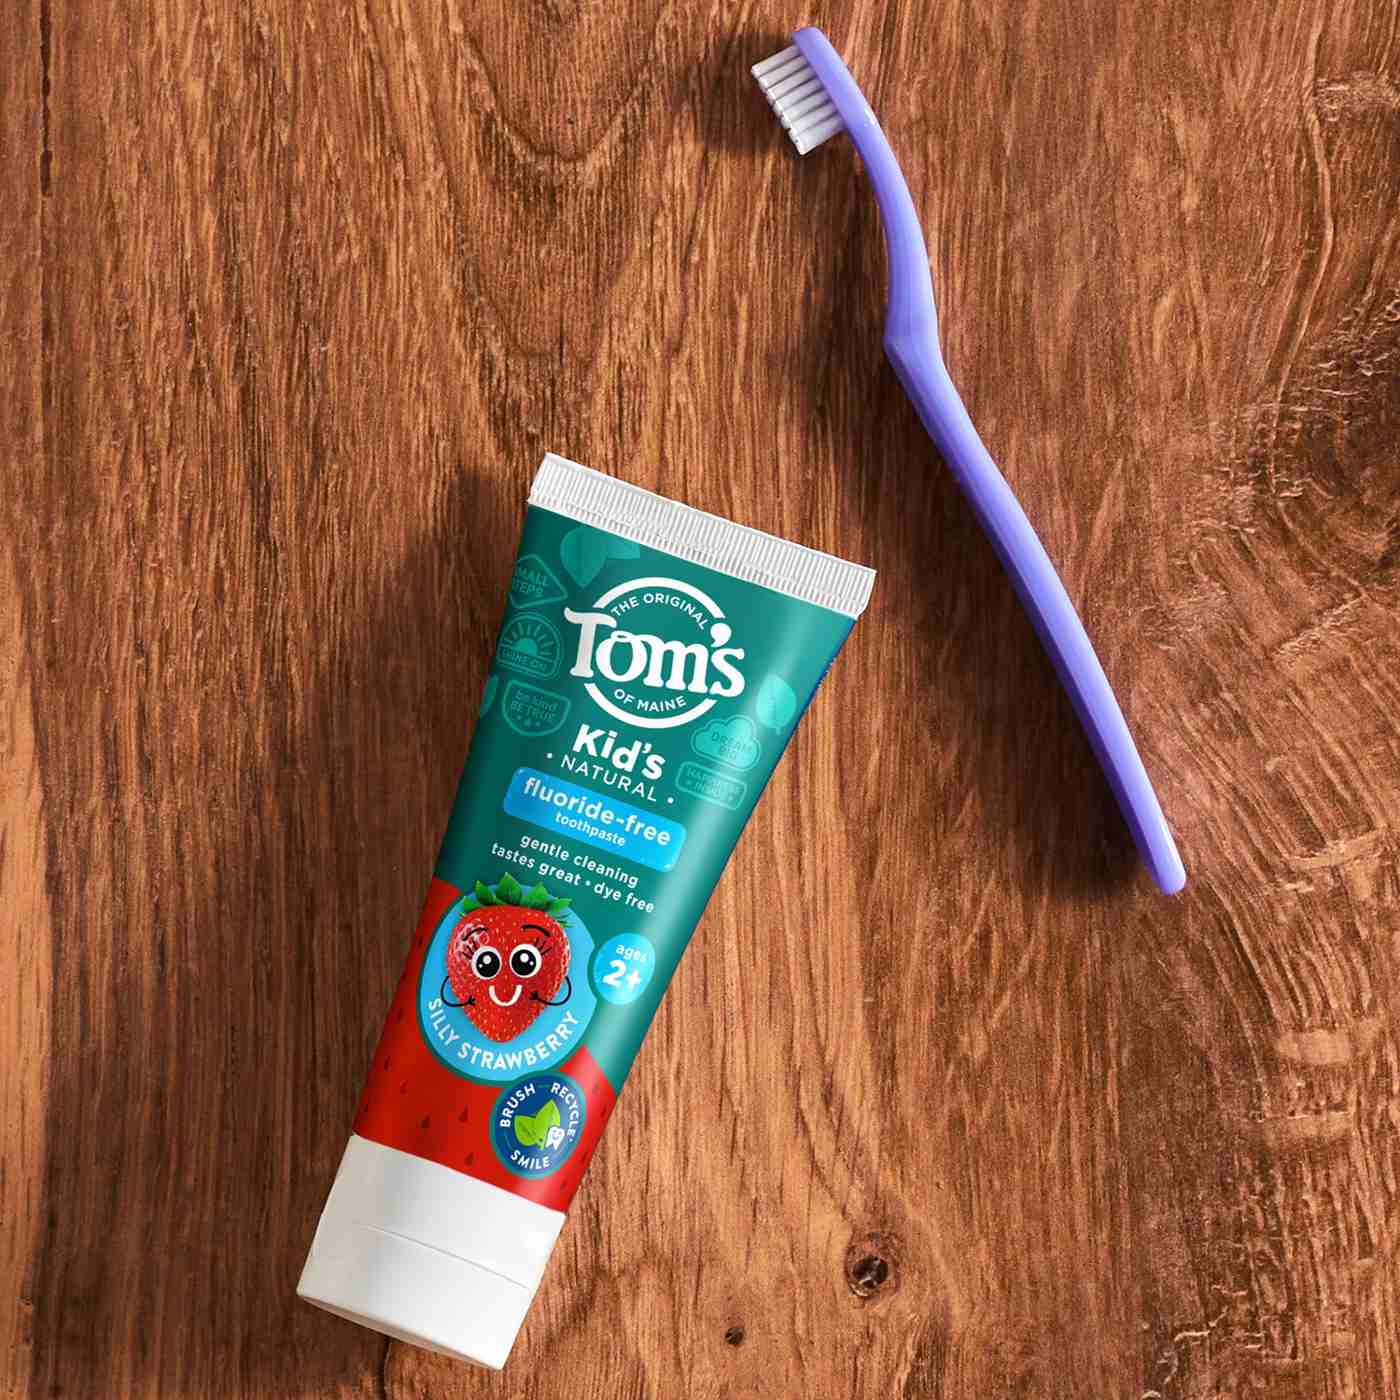 Tom's of Maine Kids Natural Toothpaste - Silly Strawberry; image 4 of 8